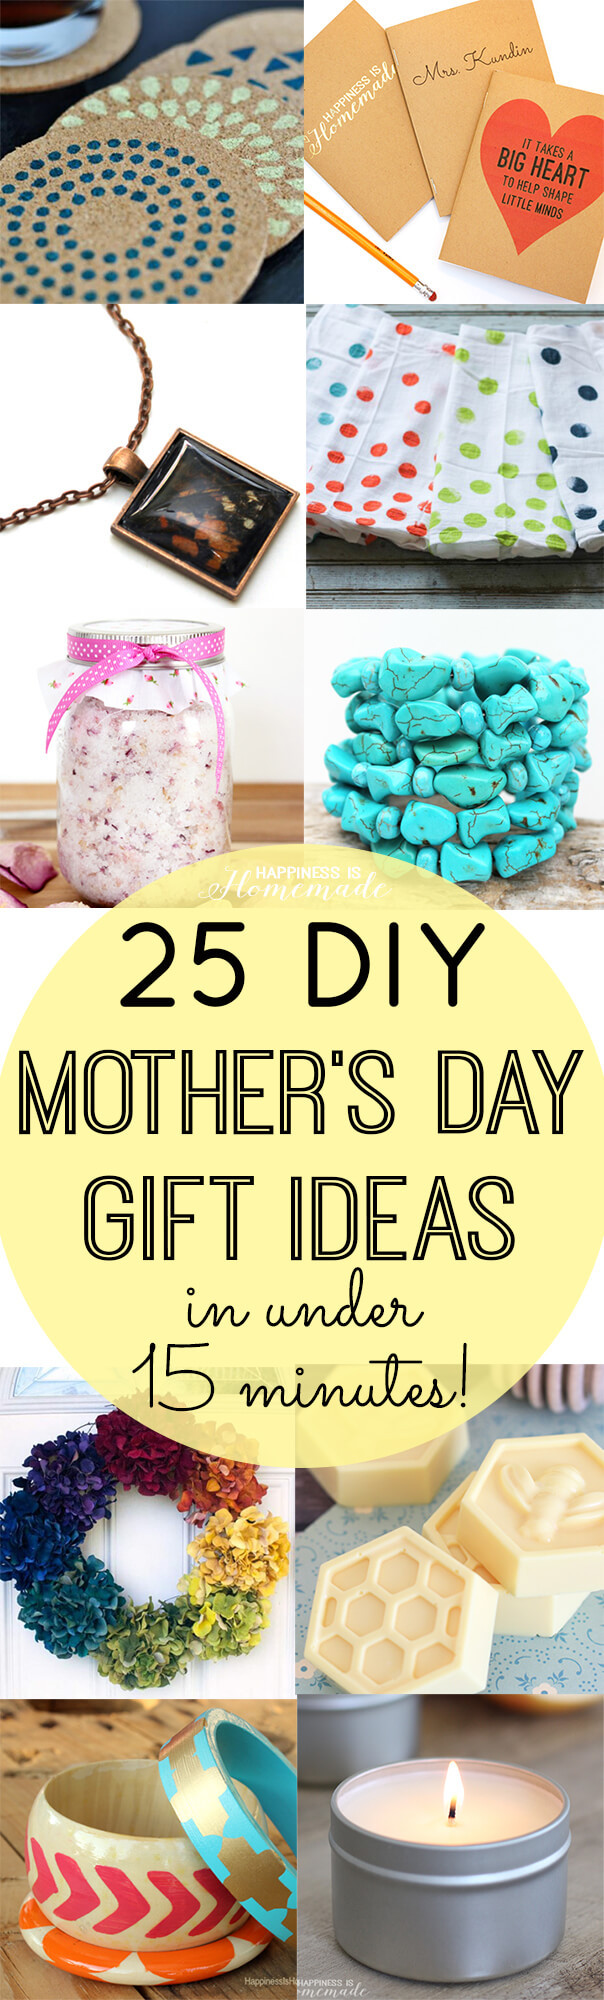 Mothers Day Homemade Gift Ideas
 DIY Mother s Day Gifts in Under 15 Minutes Happiness is